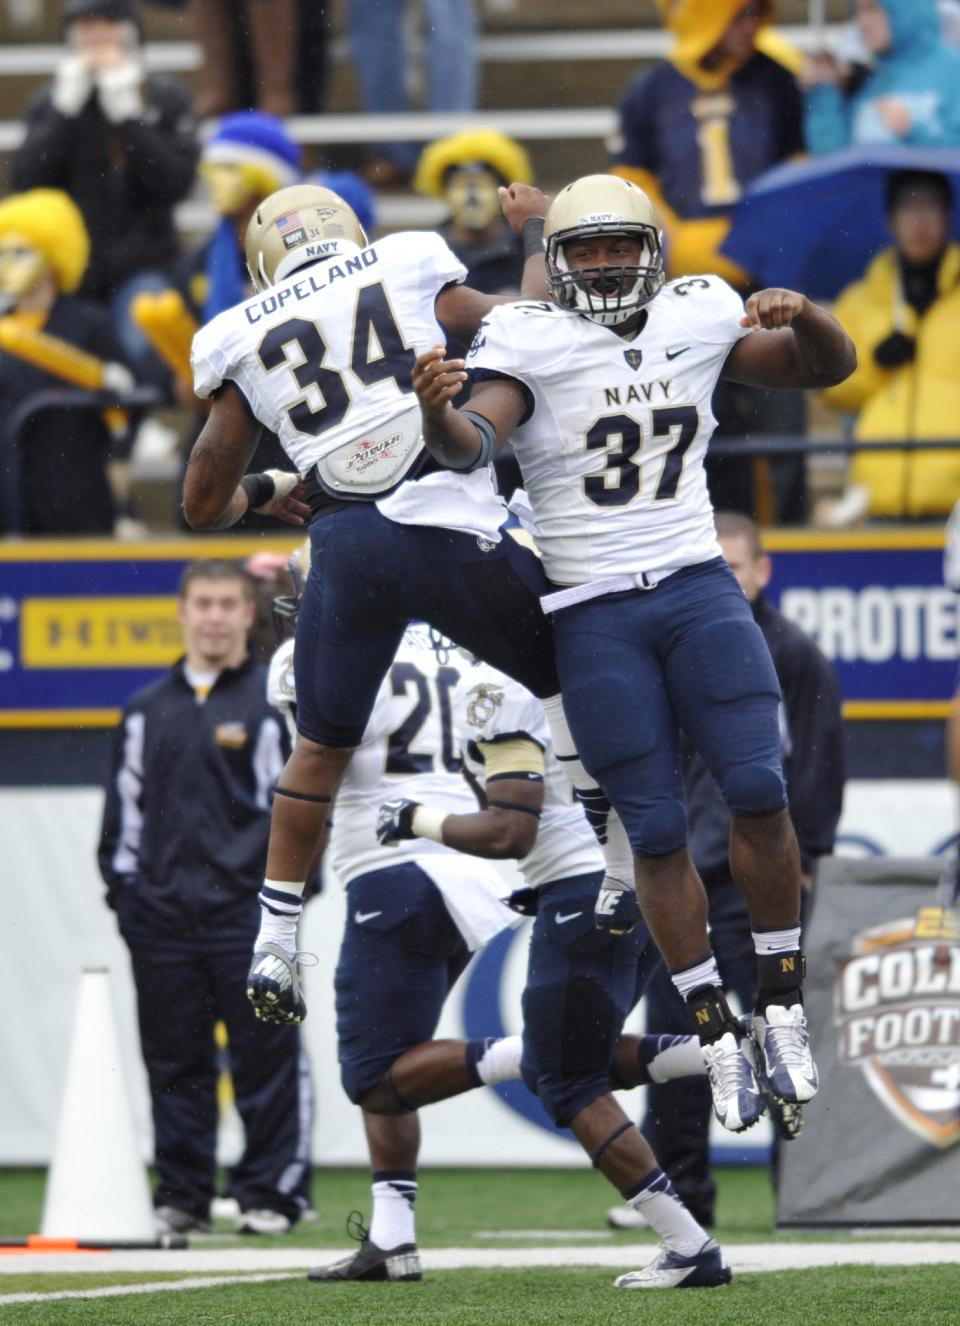 Navy fullback Chris Swain (37) celebrates his 2-yard touchdown run with fullback Noah Copeland during the first quarter of an NCAA college football game against Toledo in Toledo, Ohio, Saturday, Oct. 19, 2013. (AP Photo/David Richard)